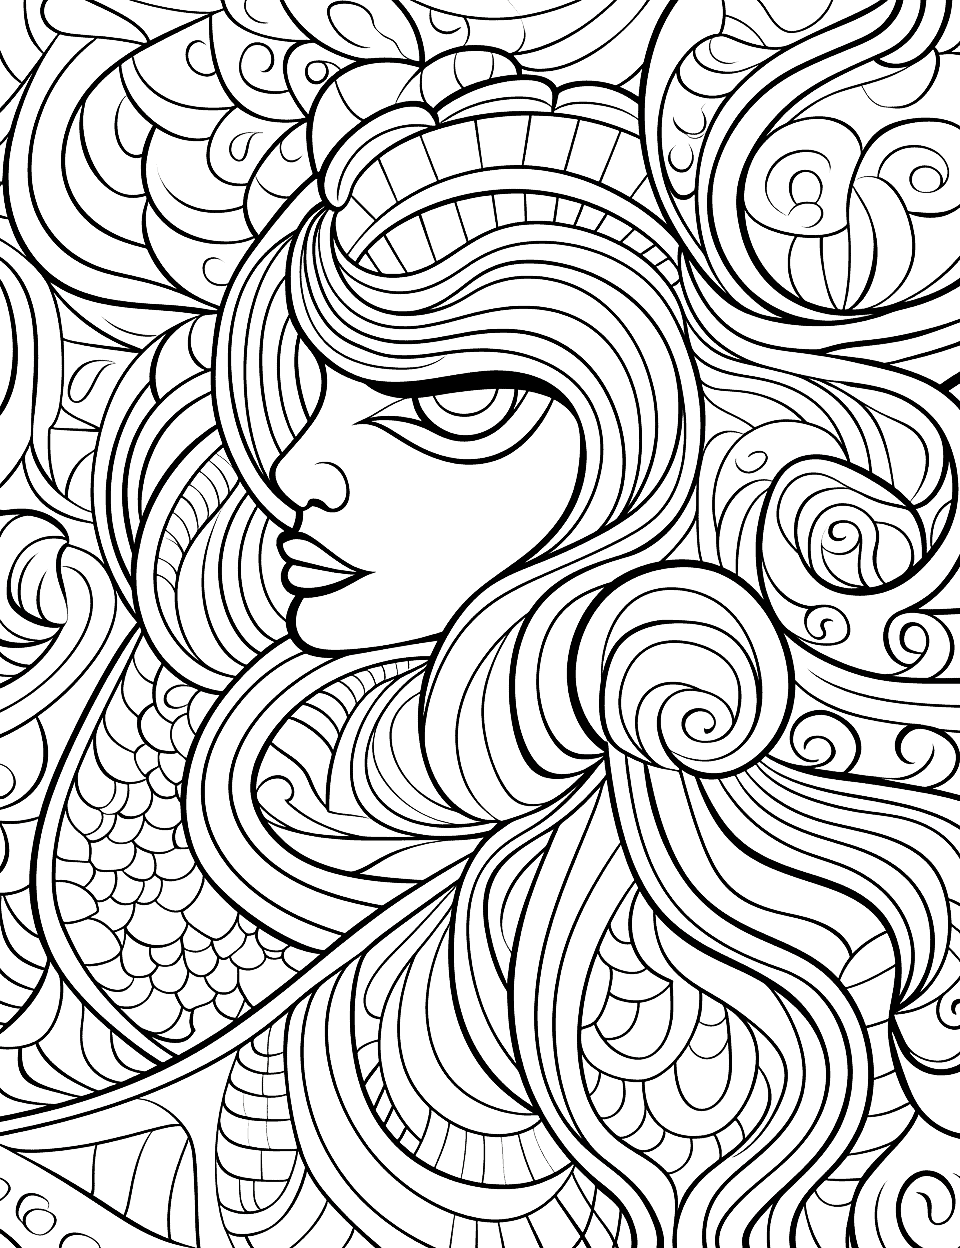 Trippy Detailed Patterns Adult Coloring Page - Highly detailed patterns featuring psychedelic elements and colors to create a trippy effect.